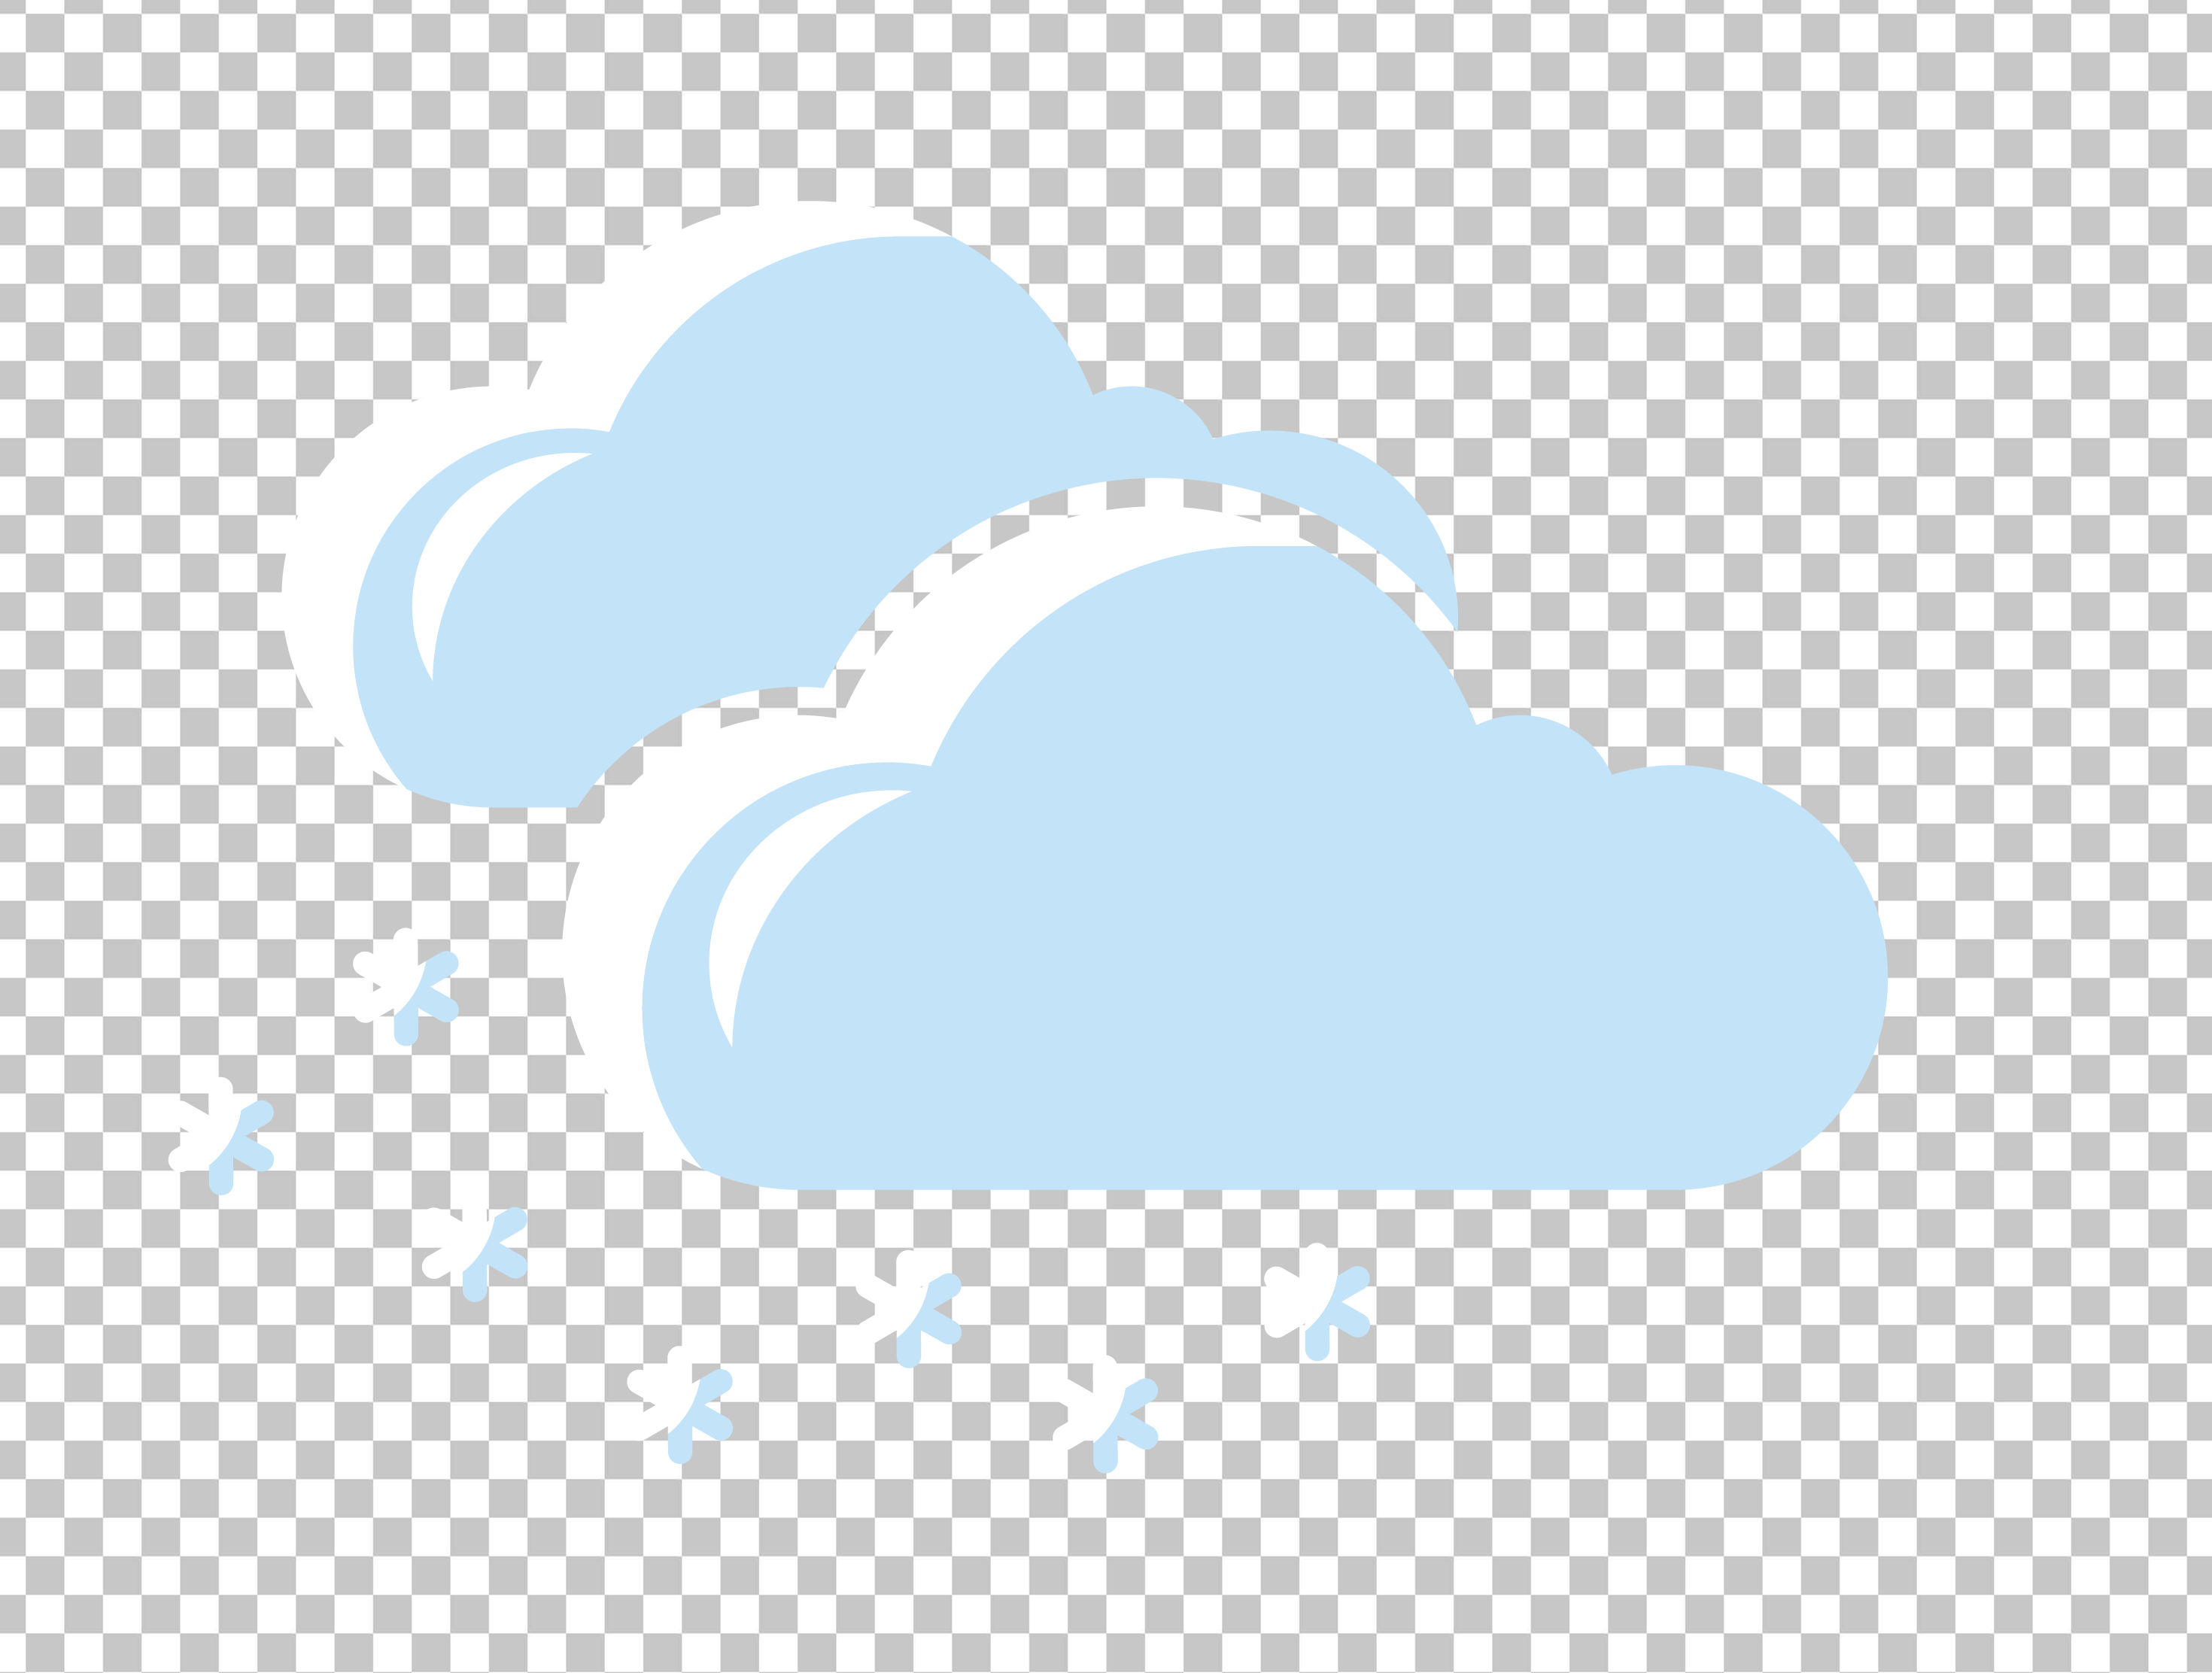 Snowy Cloud Icon PNG Image